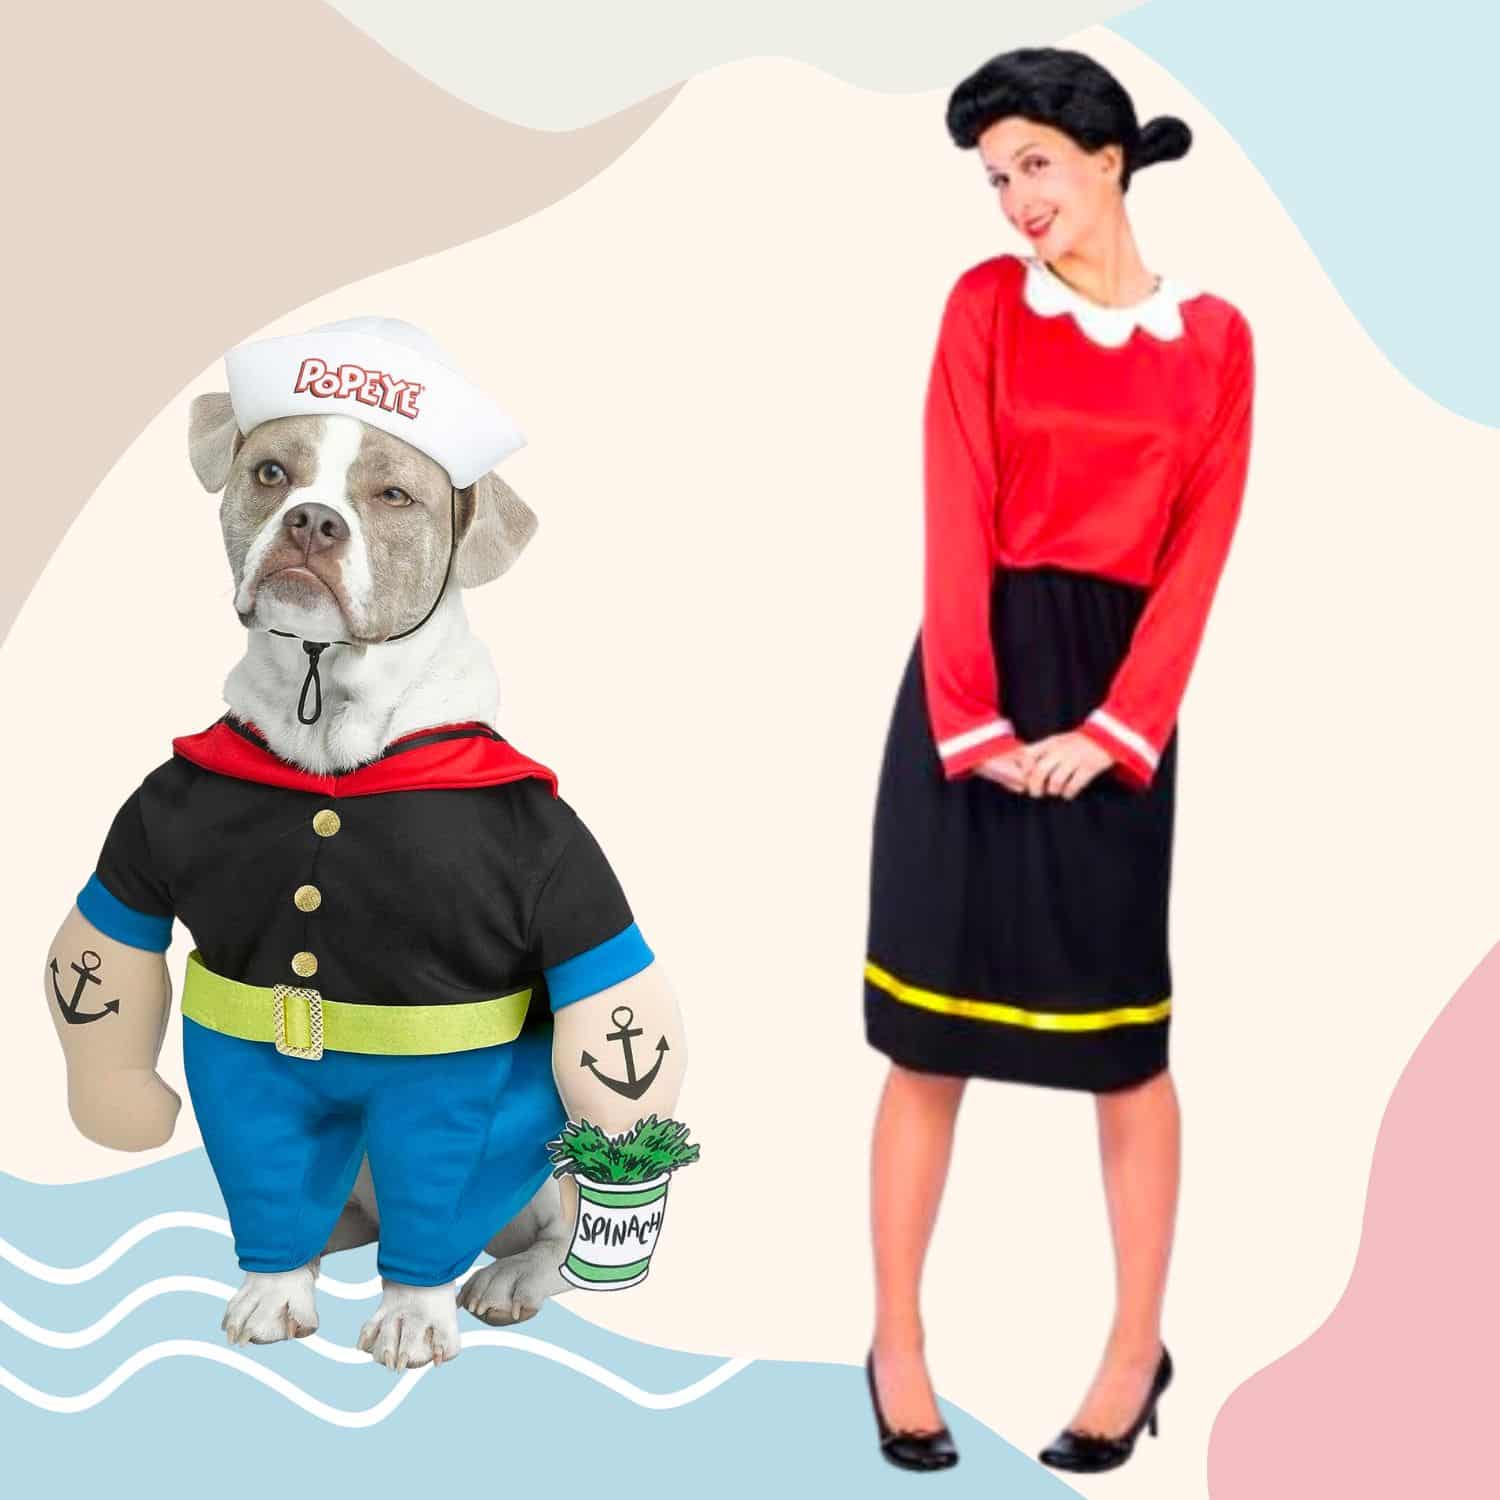 Popeye and Olive Oyl - dog Christmas ornaments | PawCool ™